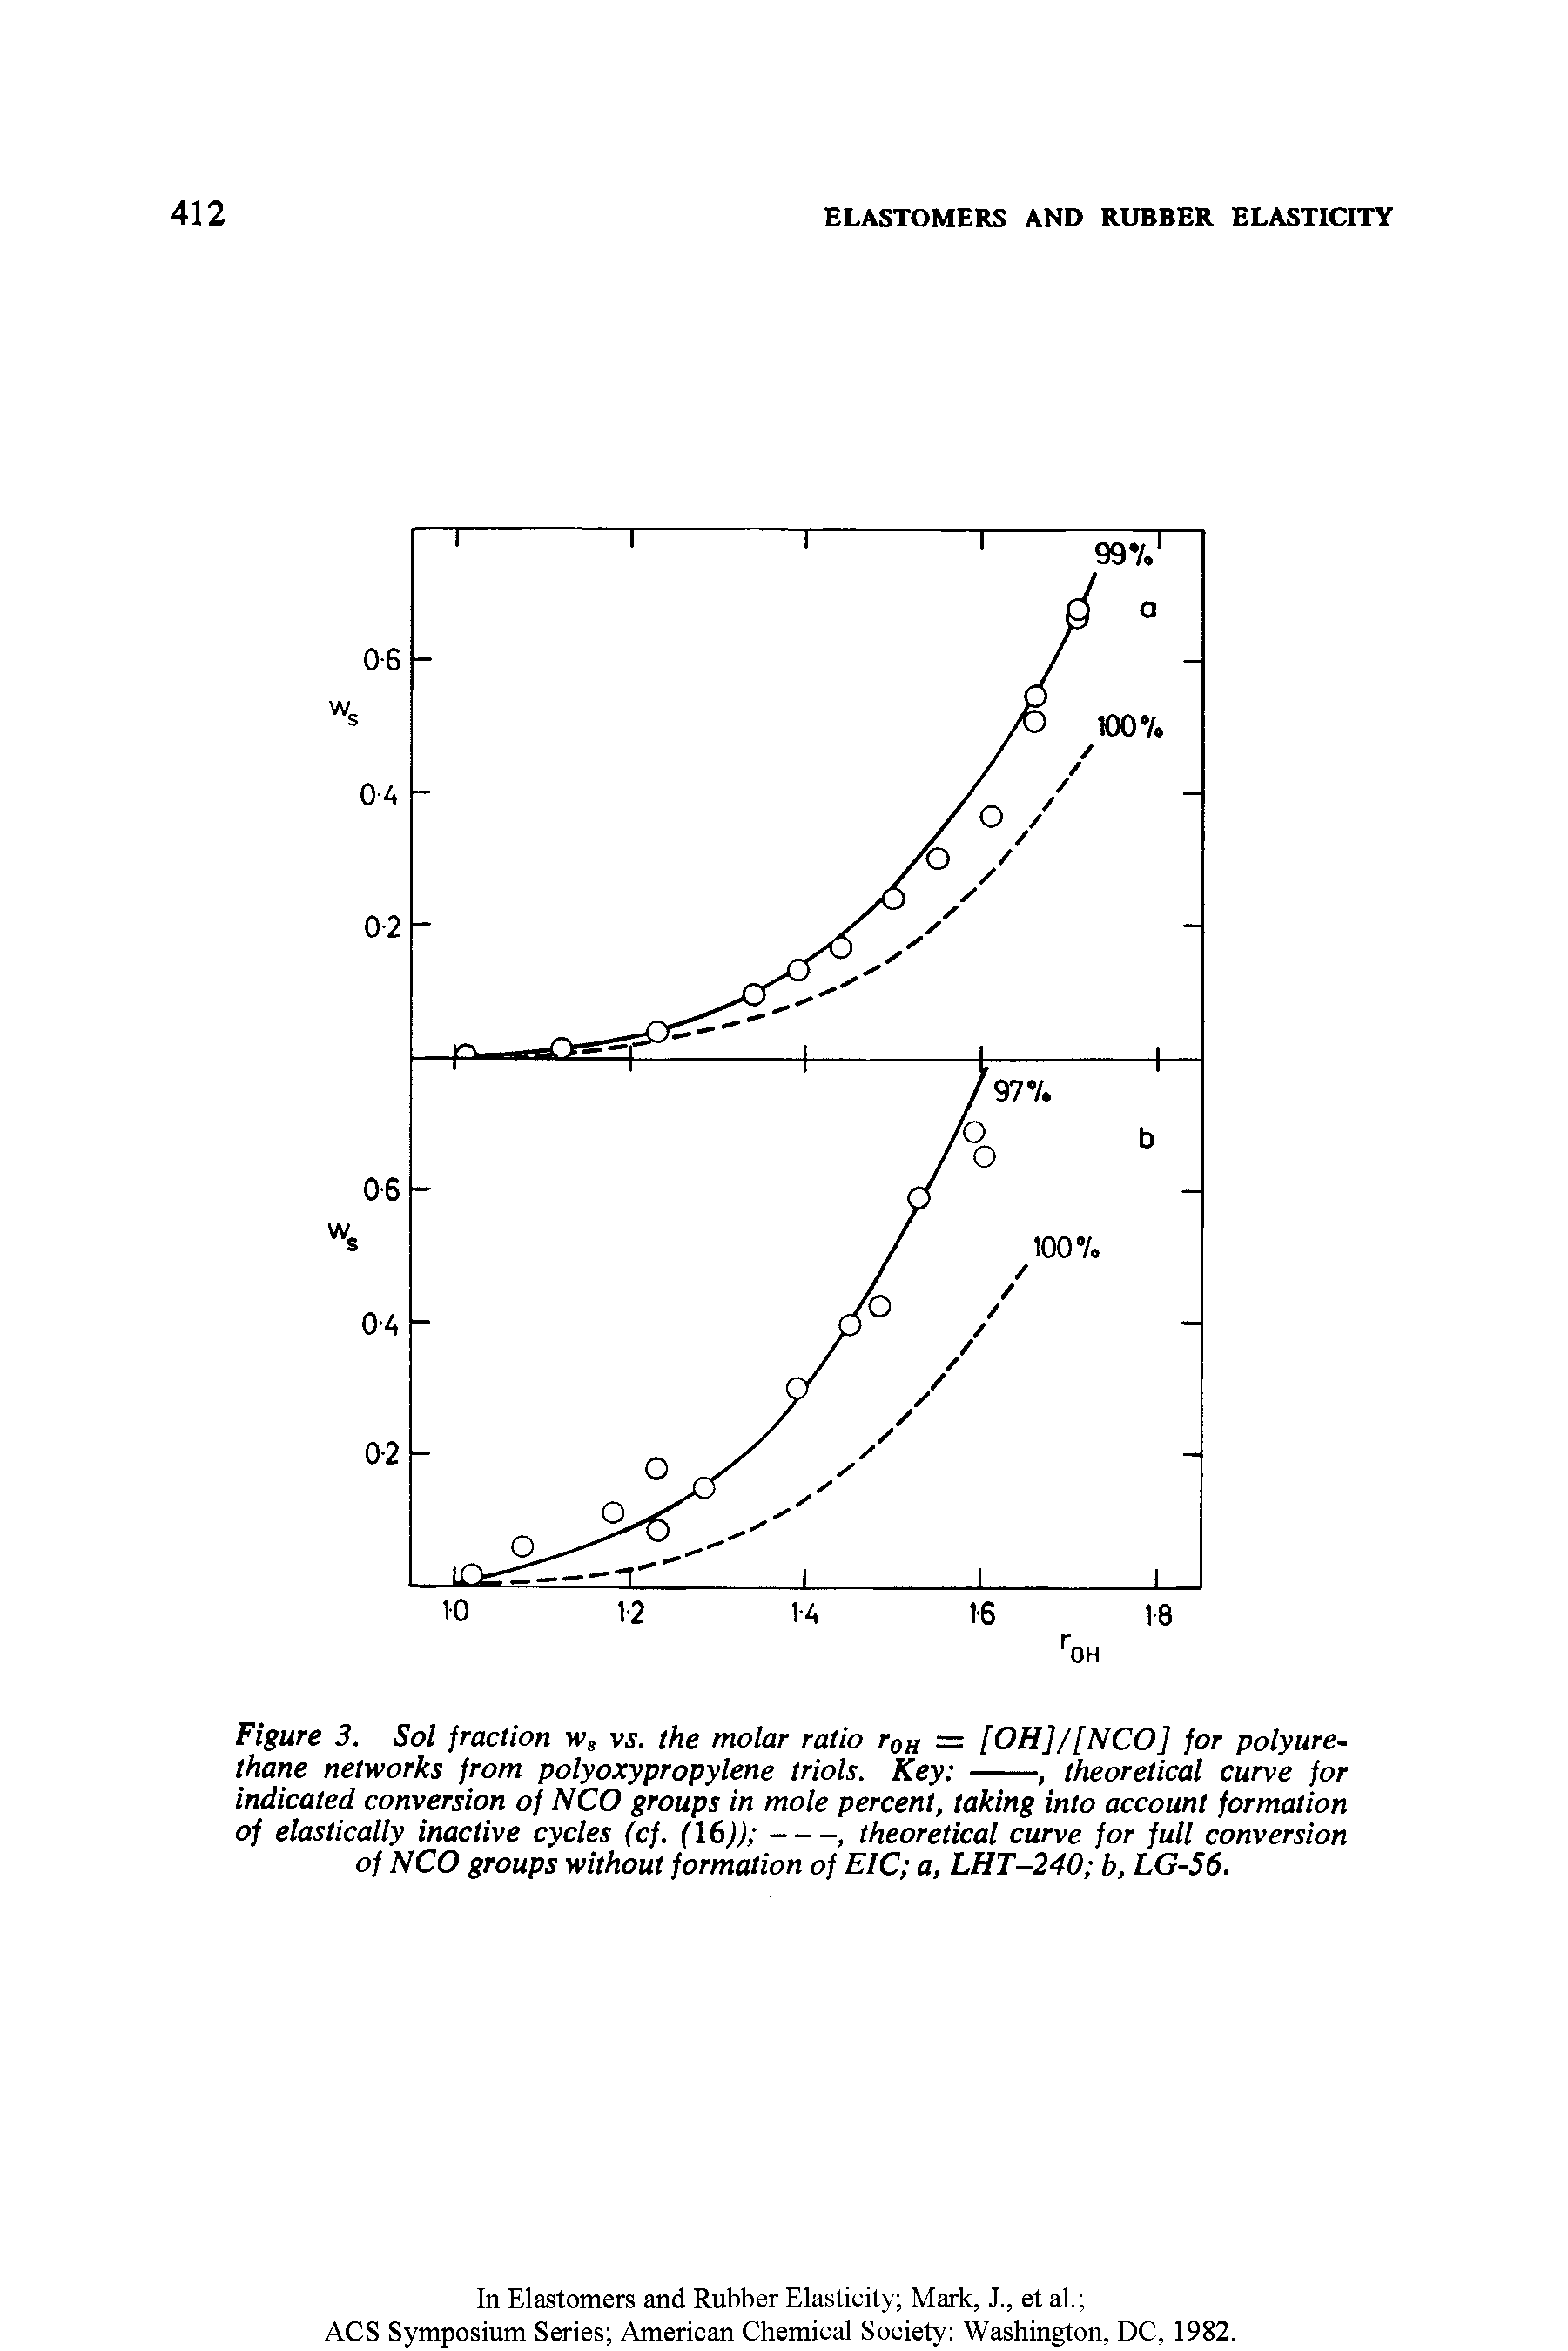 Figure 3. Sol fraction h>, vj. the molar ratio r0H = [OH]/[NCO] for polyurethane networks from polyoxypropylene triols. Key --------, theoretical curve for...